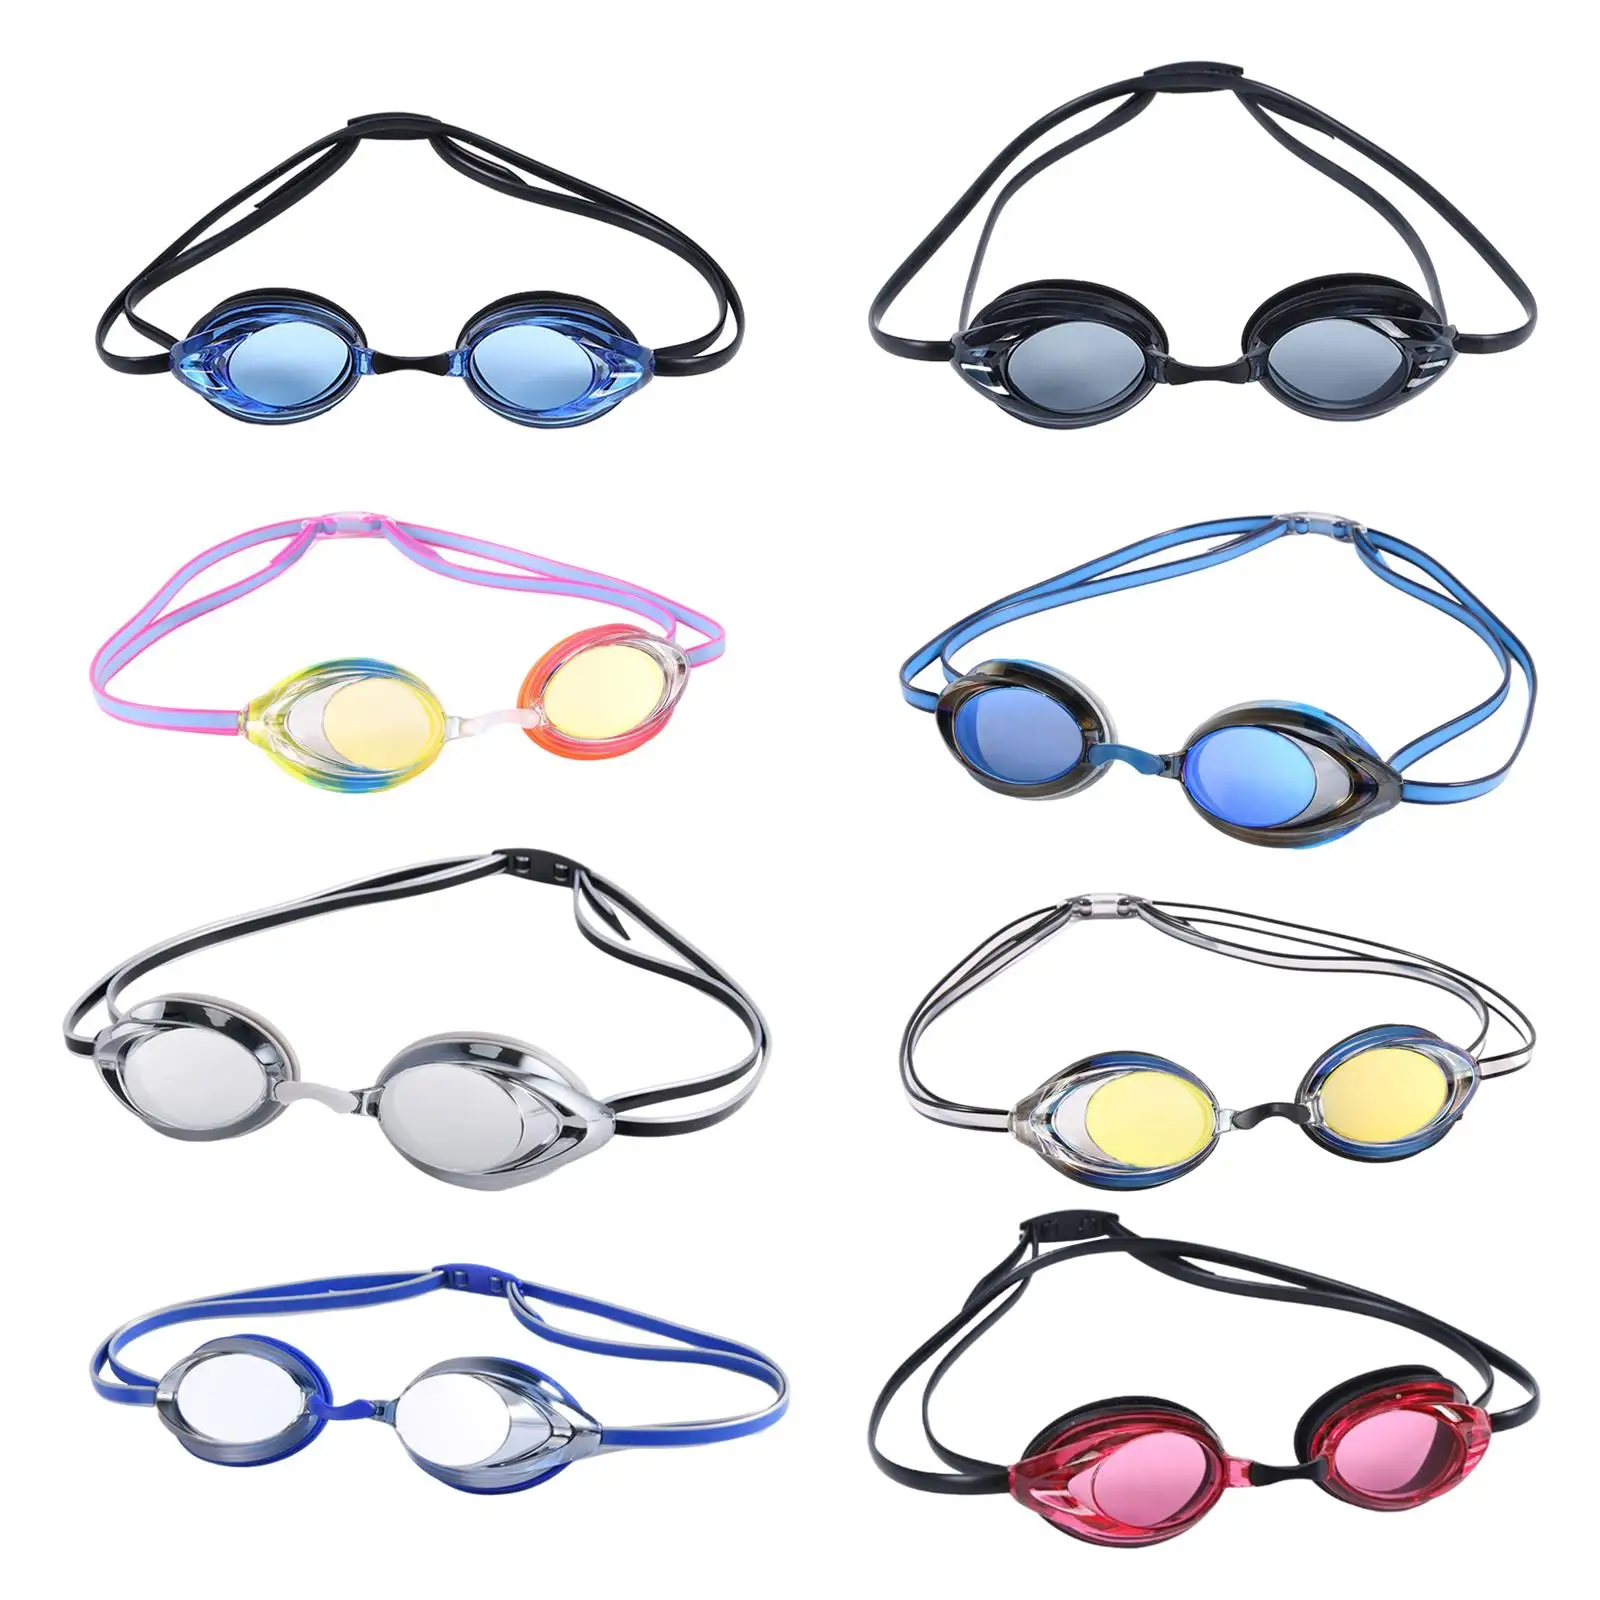 Water Glasses Professional Swimming Goggles Adults Waterproof Swim Protection Anti Fog Adjustable Glasses Water